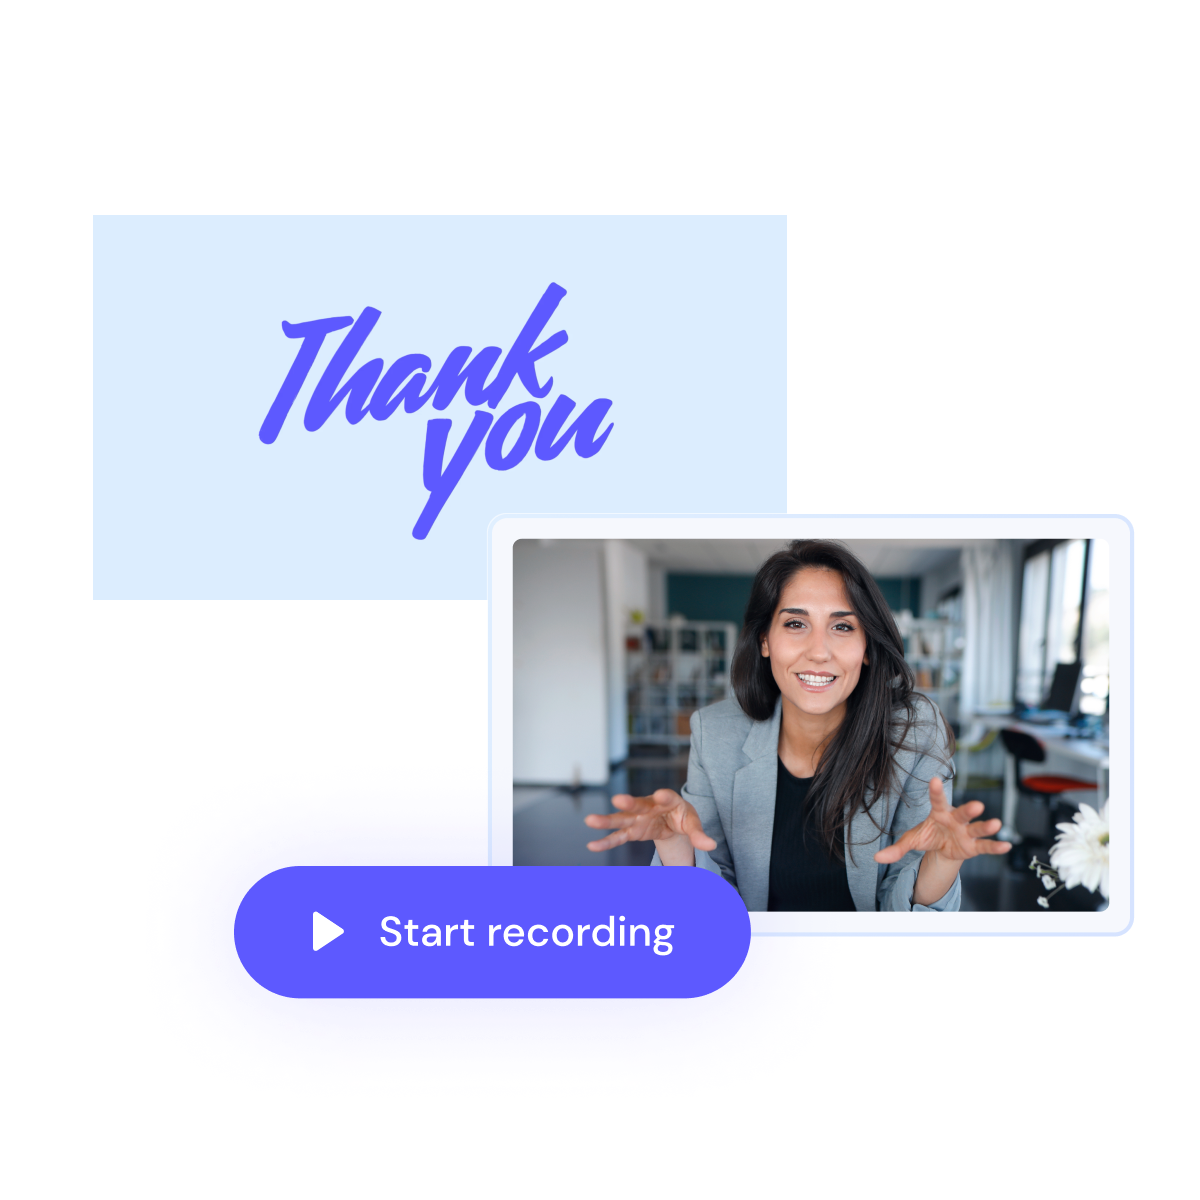 Woman smiling on a video call with a "thank you" message and a "start recording" button visible.